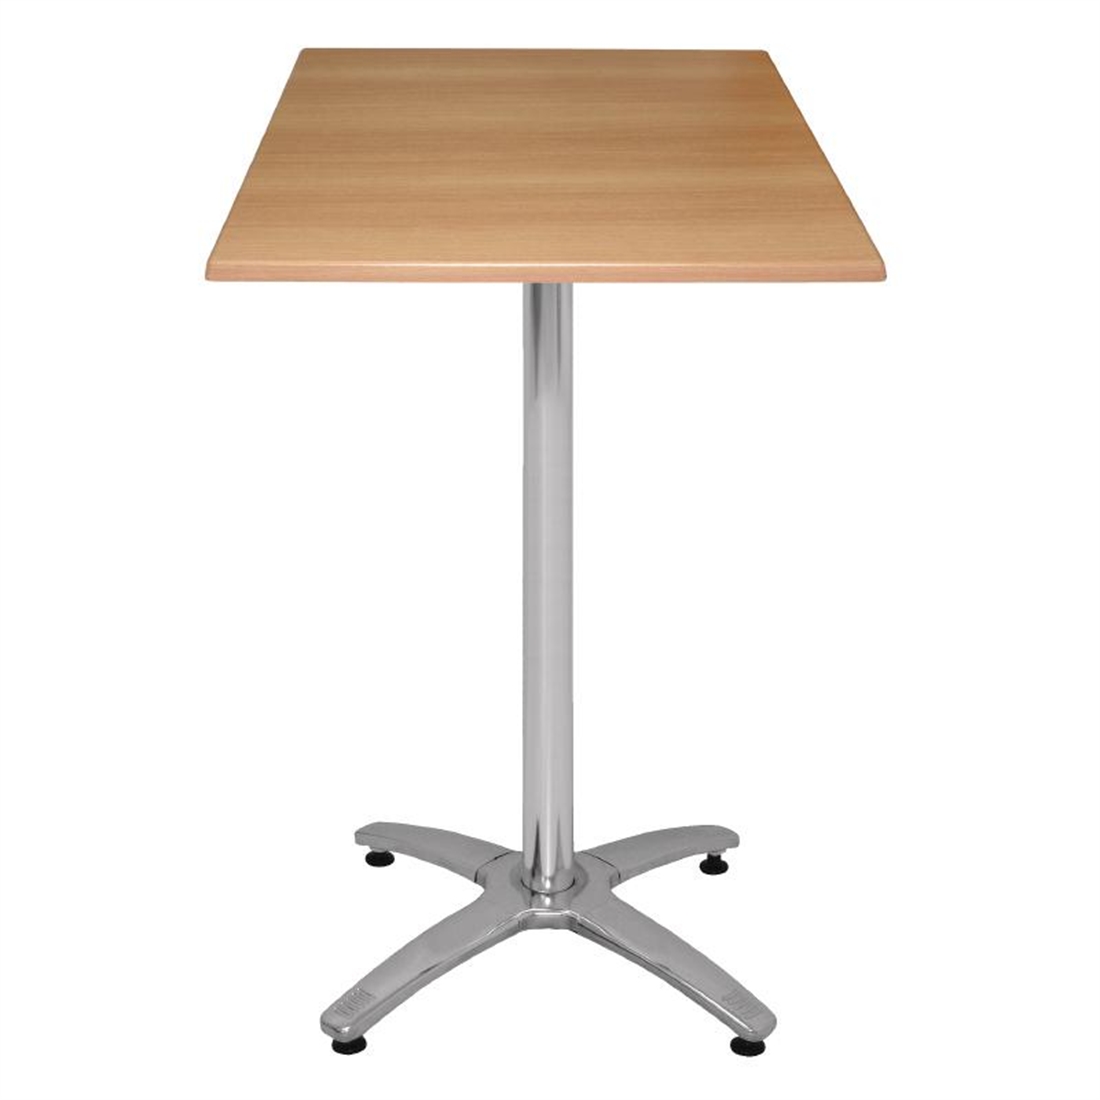 Special Offer Bolero Poseur Height Square Beech Table Top and Base Combo